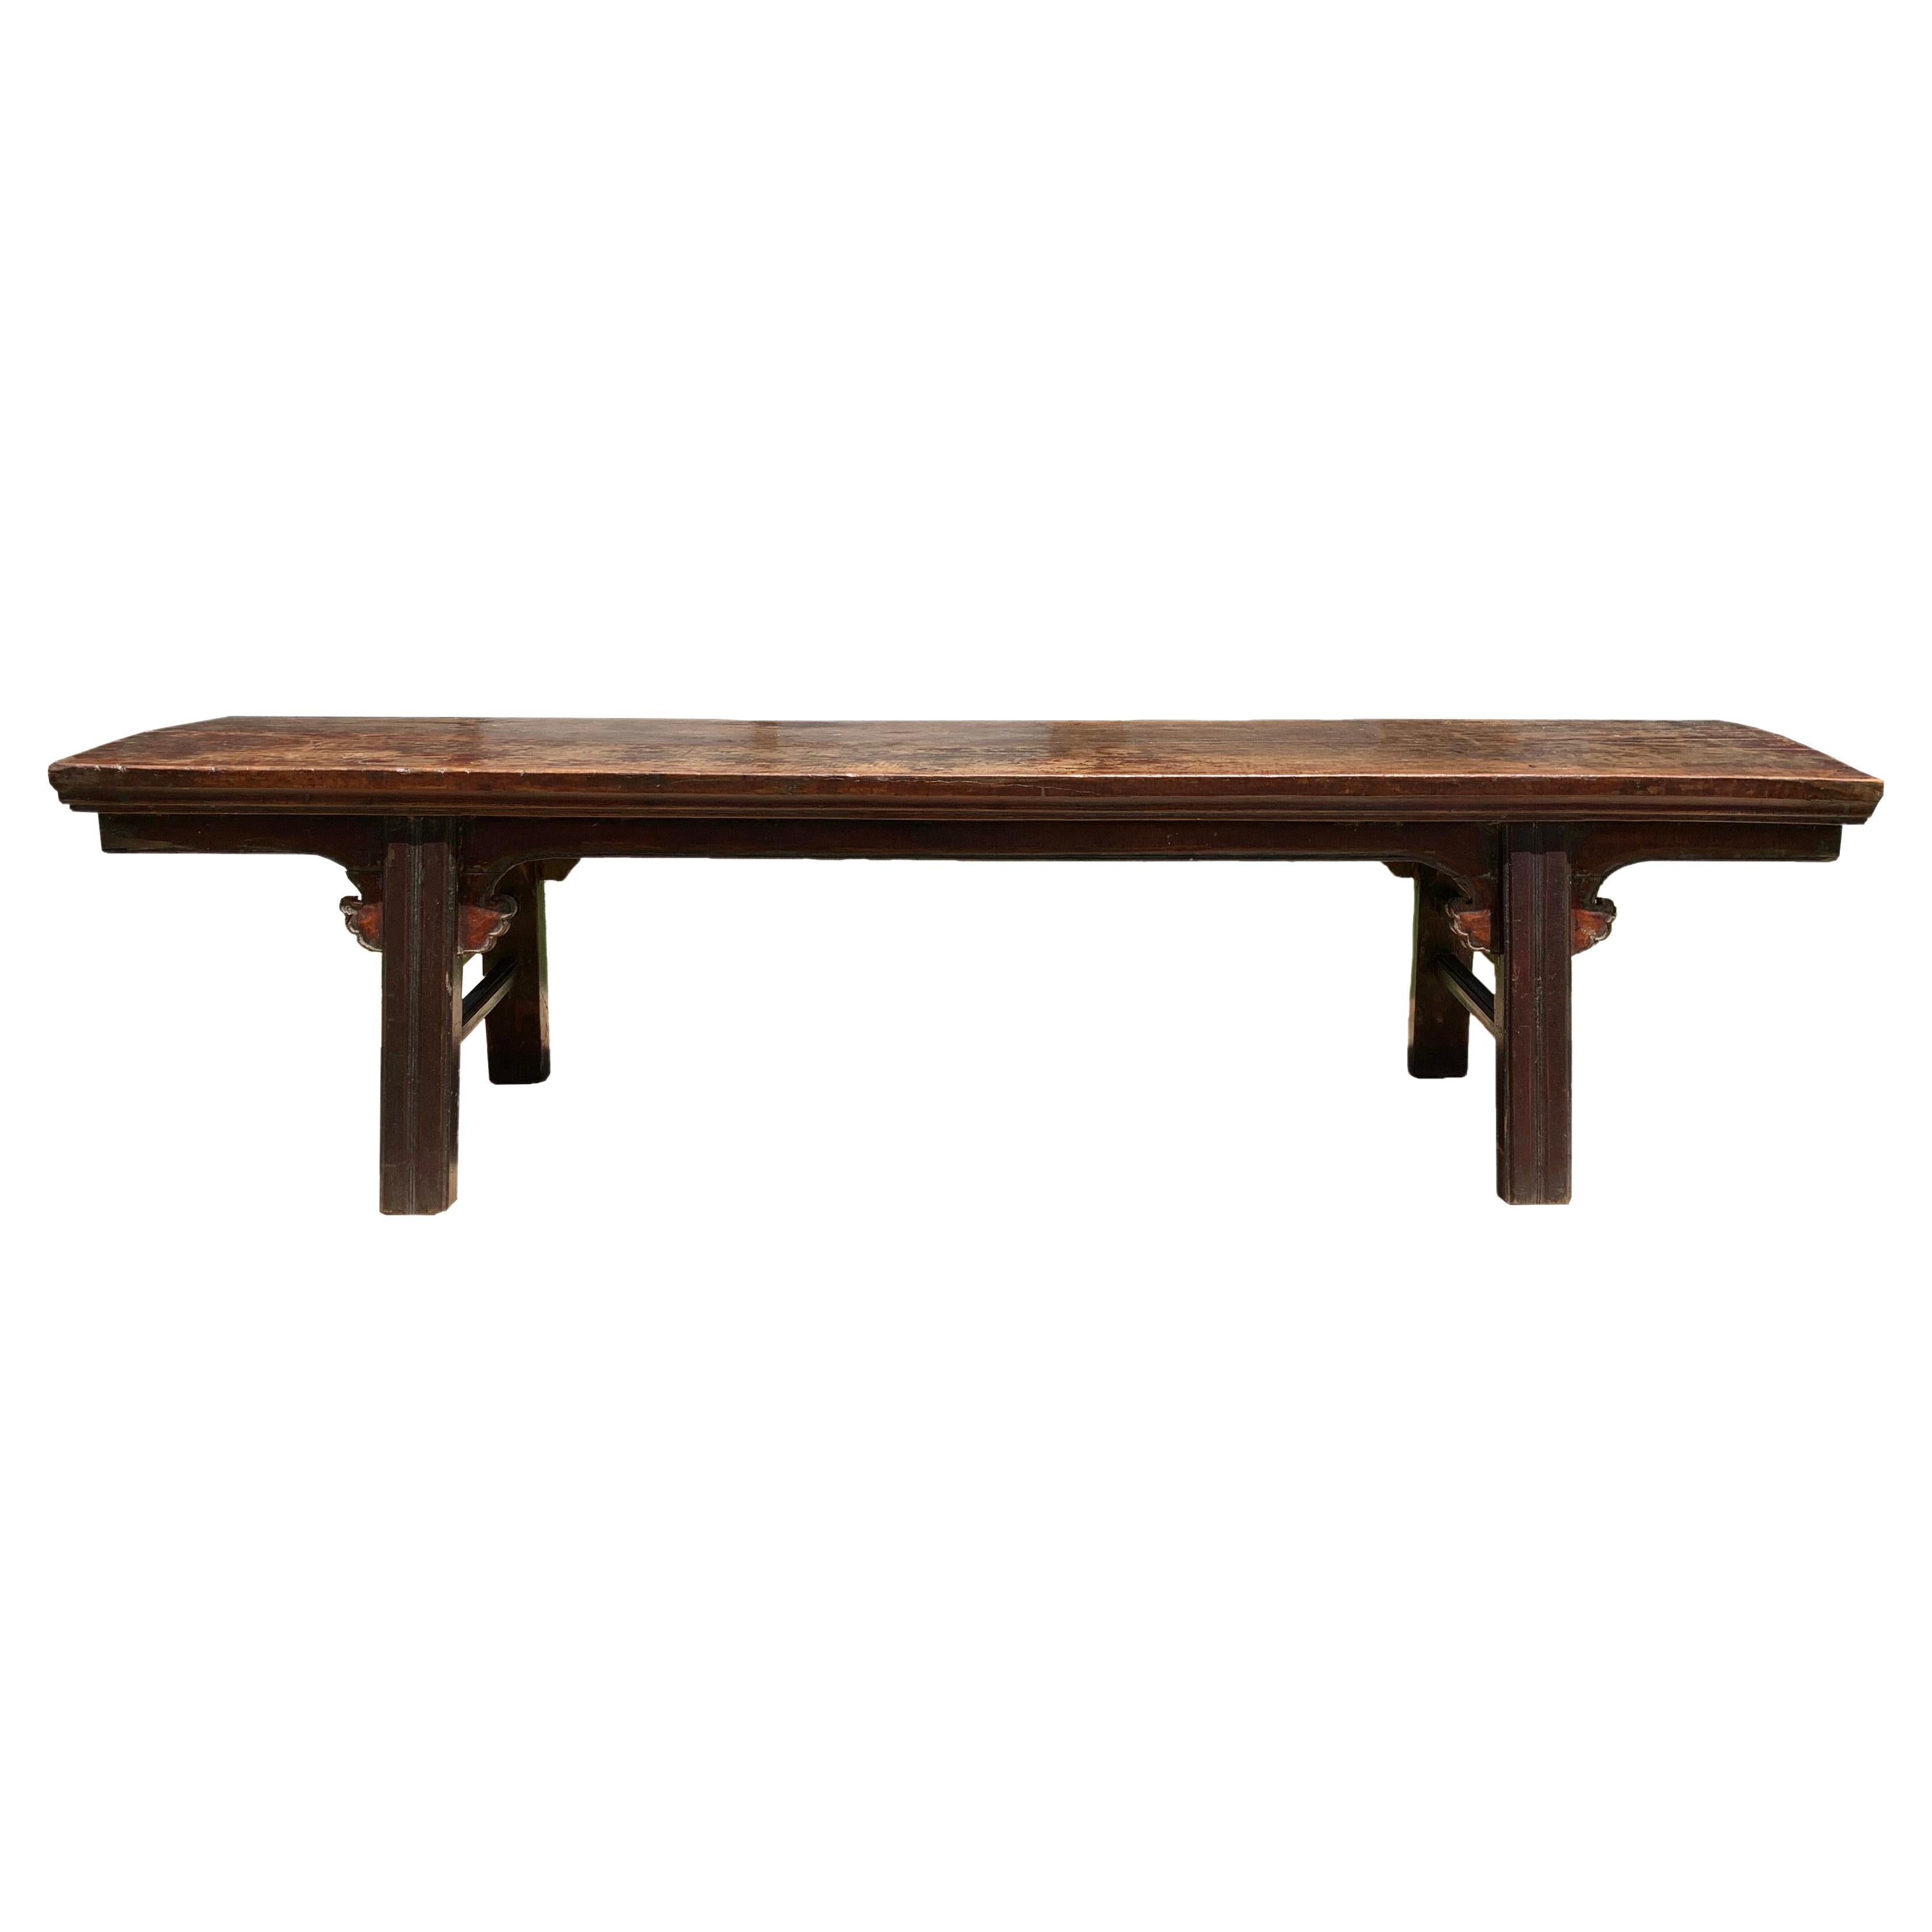 Early 20th Century Chinese Walnut Wood Lacquered Long Bench Shanxi, China